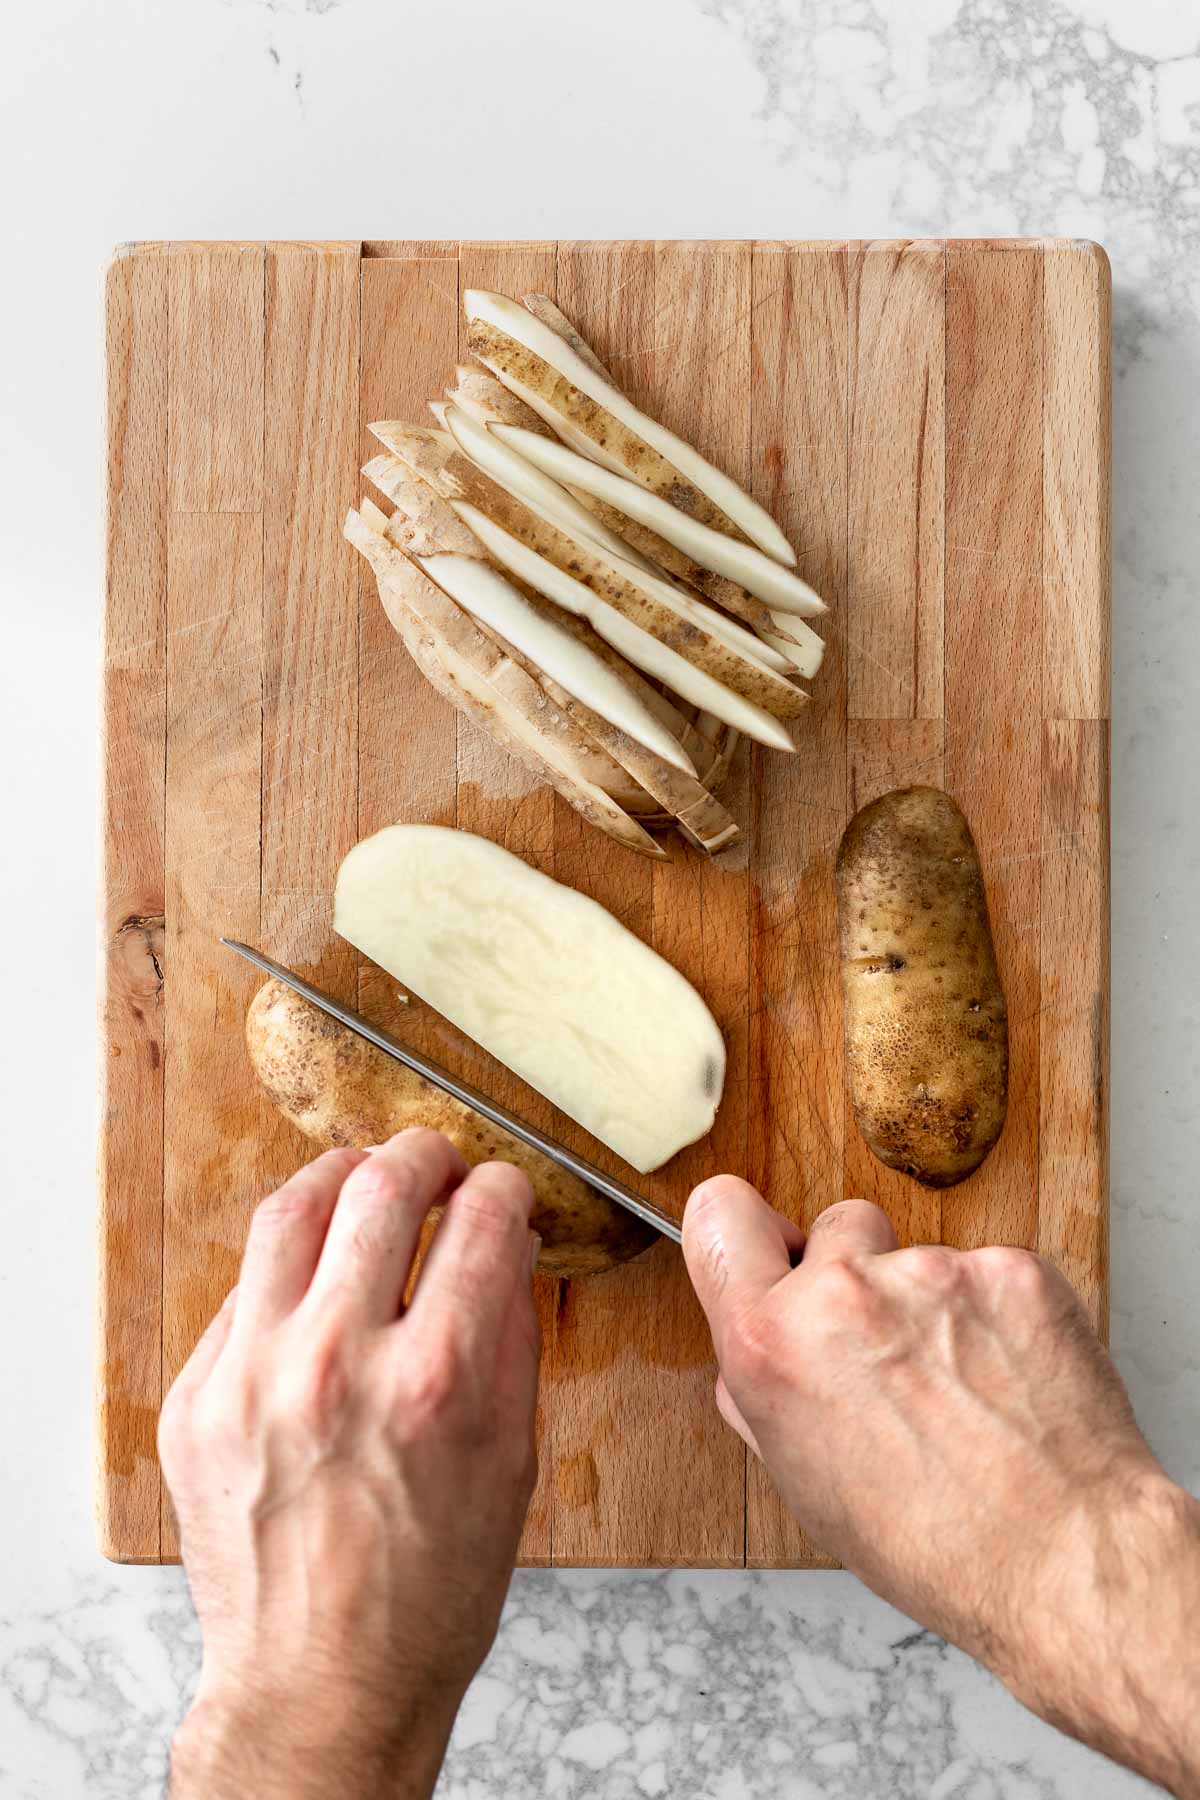 Hand cutting potatoes into fries on a cutting board.